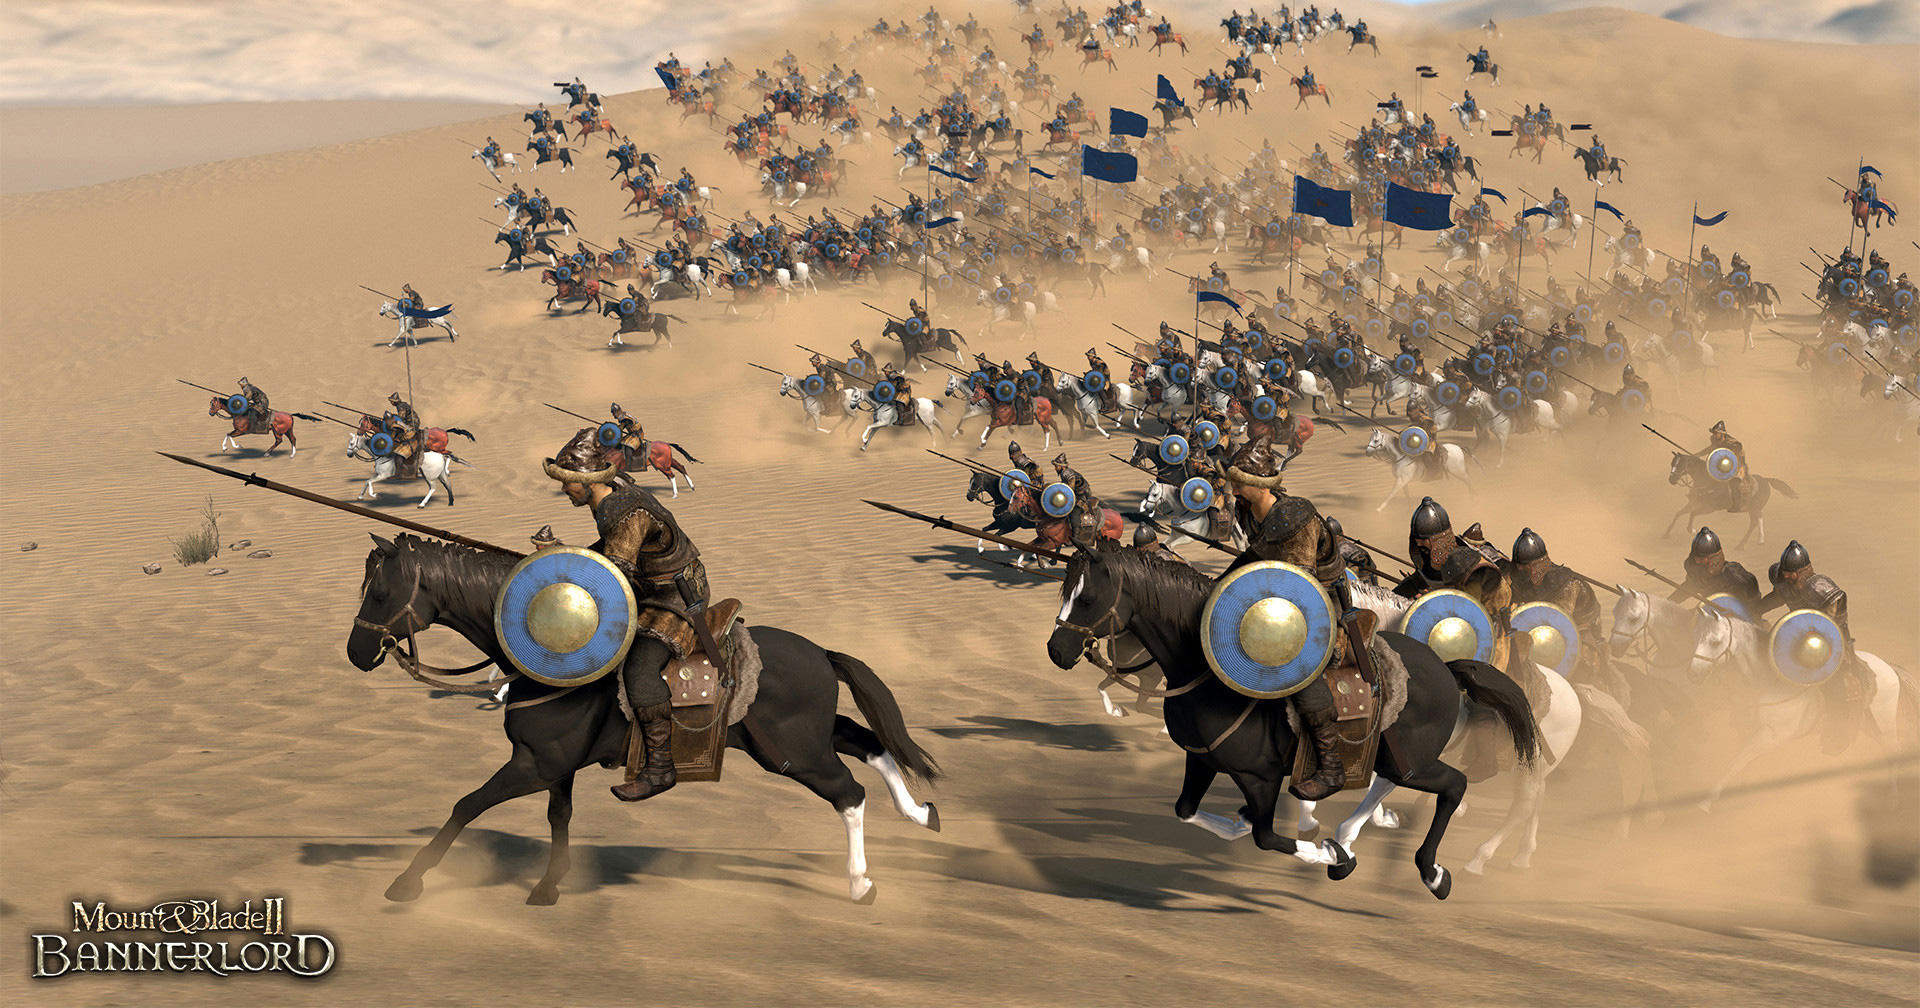 Mount and Blade 2 Bannerlord cultures: How to choose the best one?